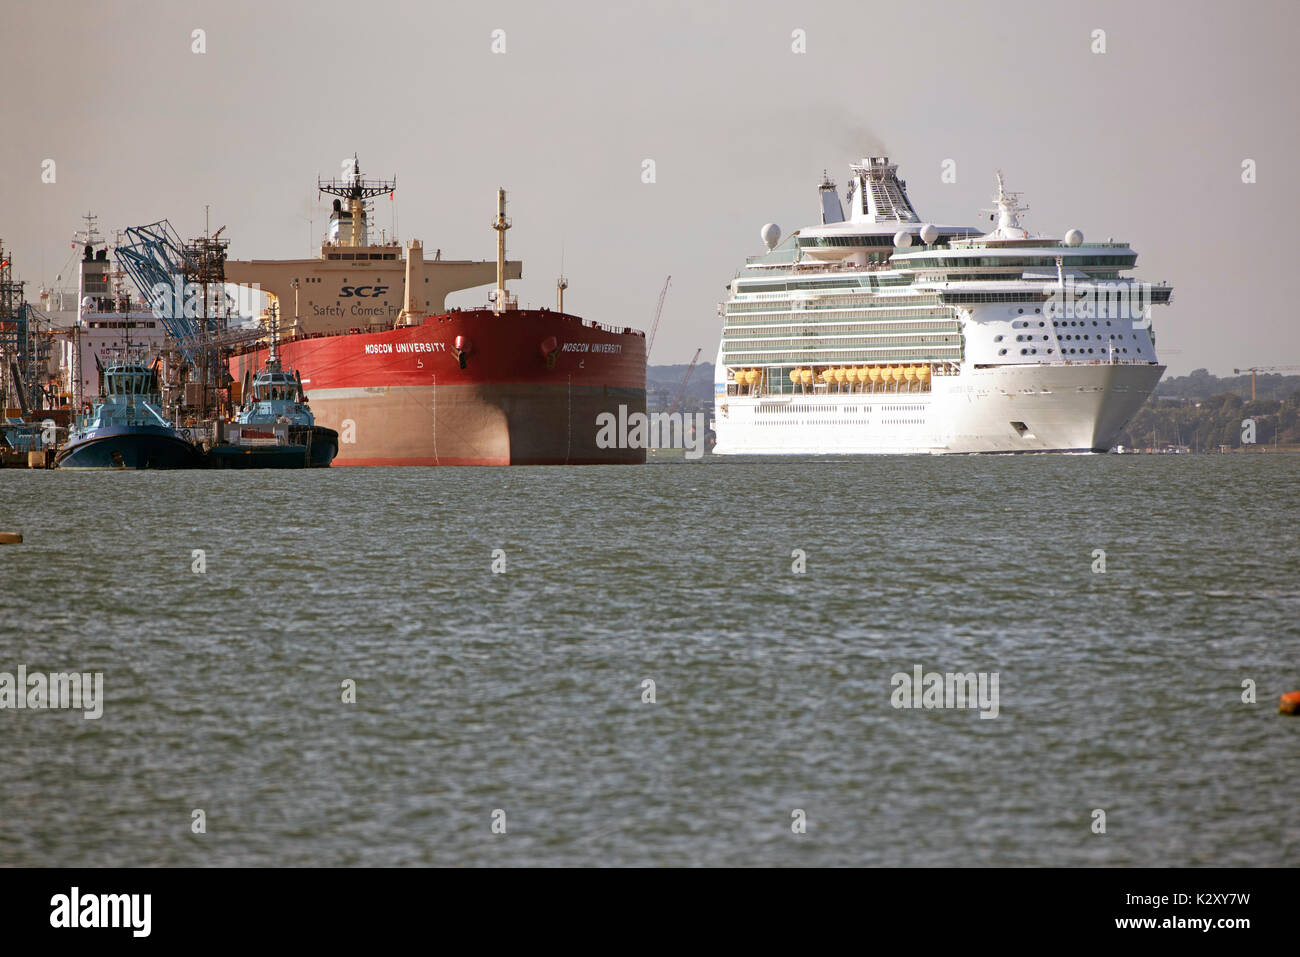 Cruise liner Navigator of the Seas passing the Russian tanker ship Moscow University alongside the Fawley Marine Terminal on Southampton Water, UK Stock Photo